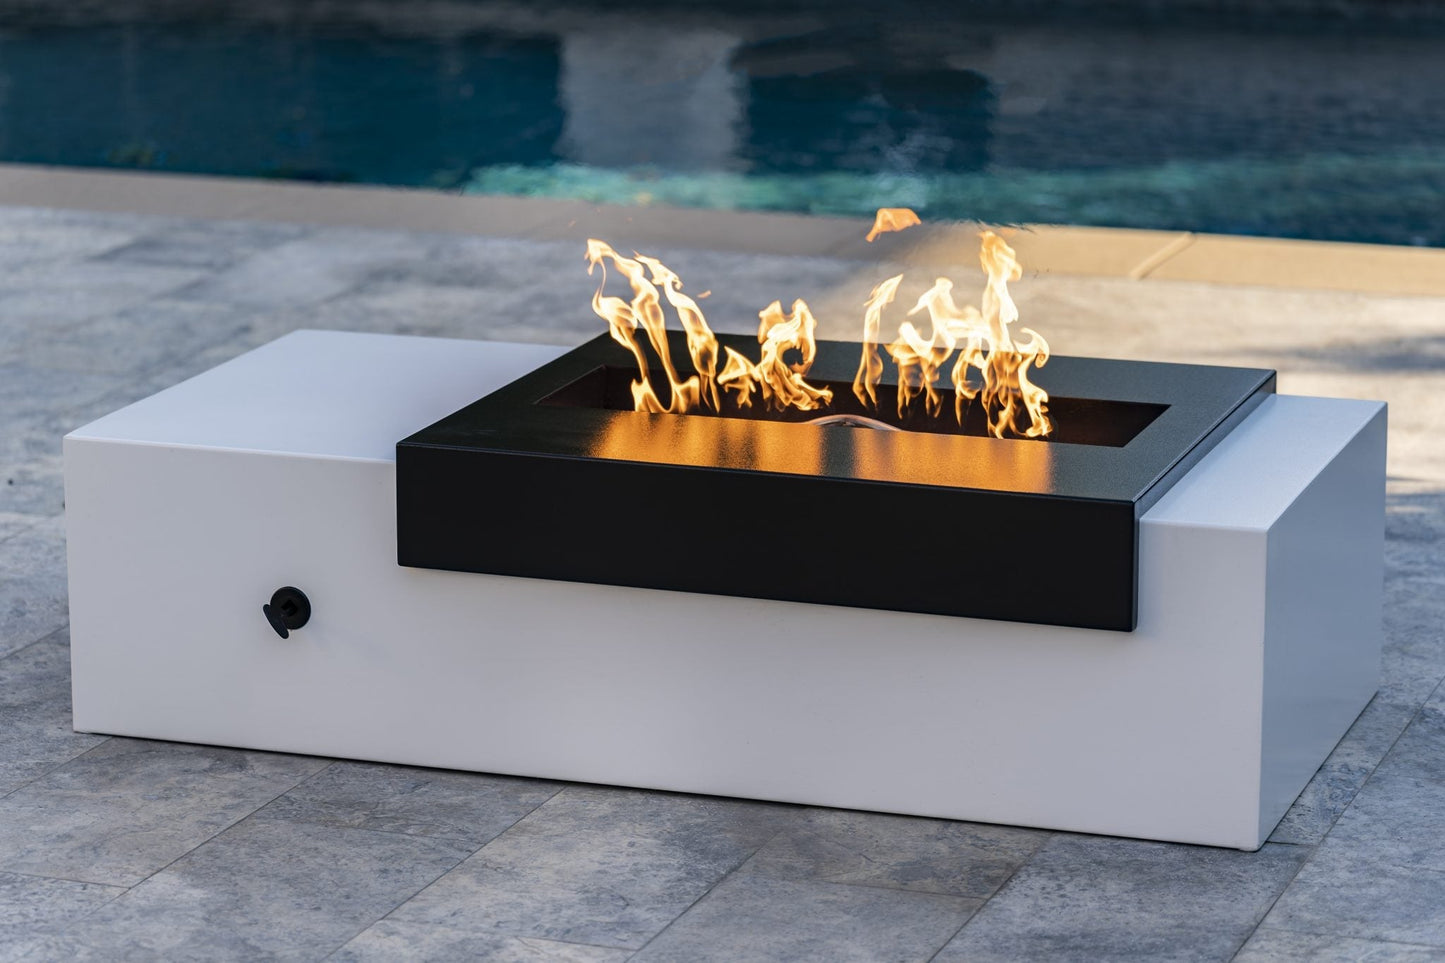 The Outdoor Plus Moonstone Black & White 84" Powder Coated Metal Fire Pit Propane Gas with Match Lit Ignition